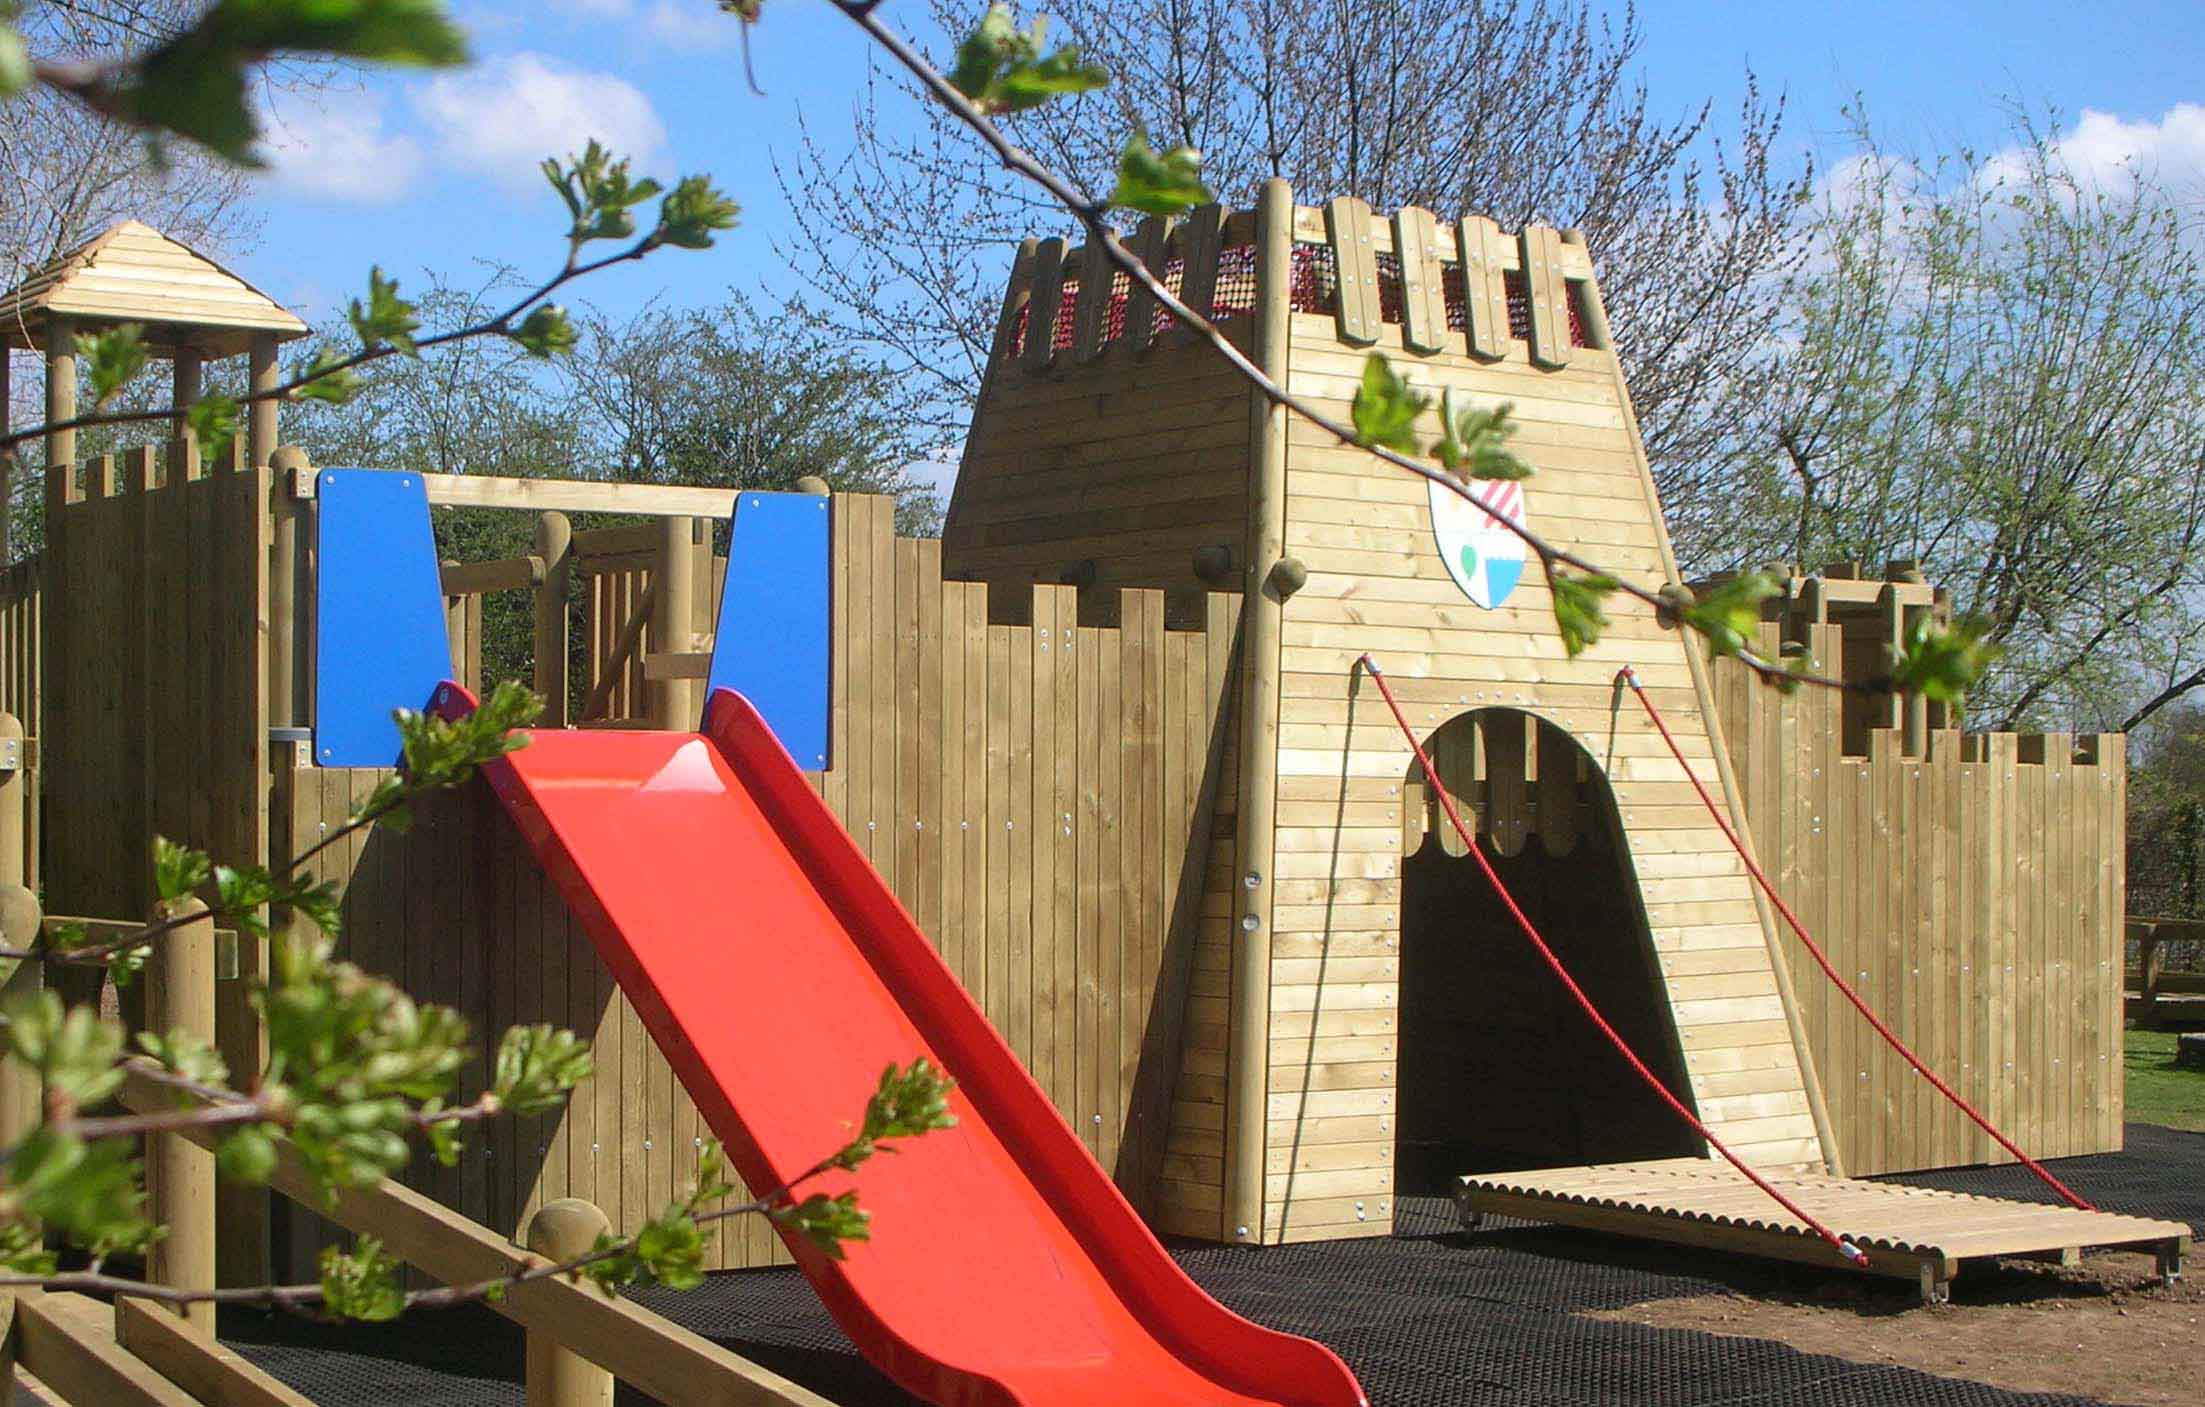 Castle play area at TVAP